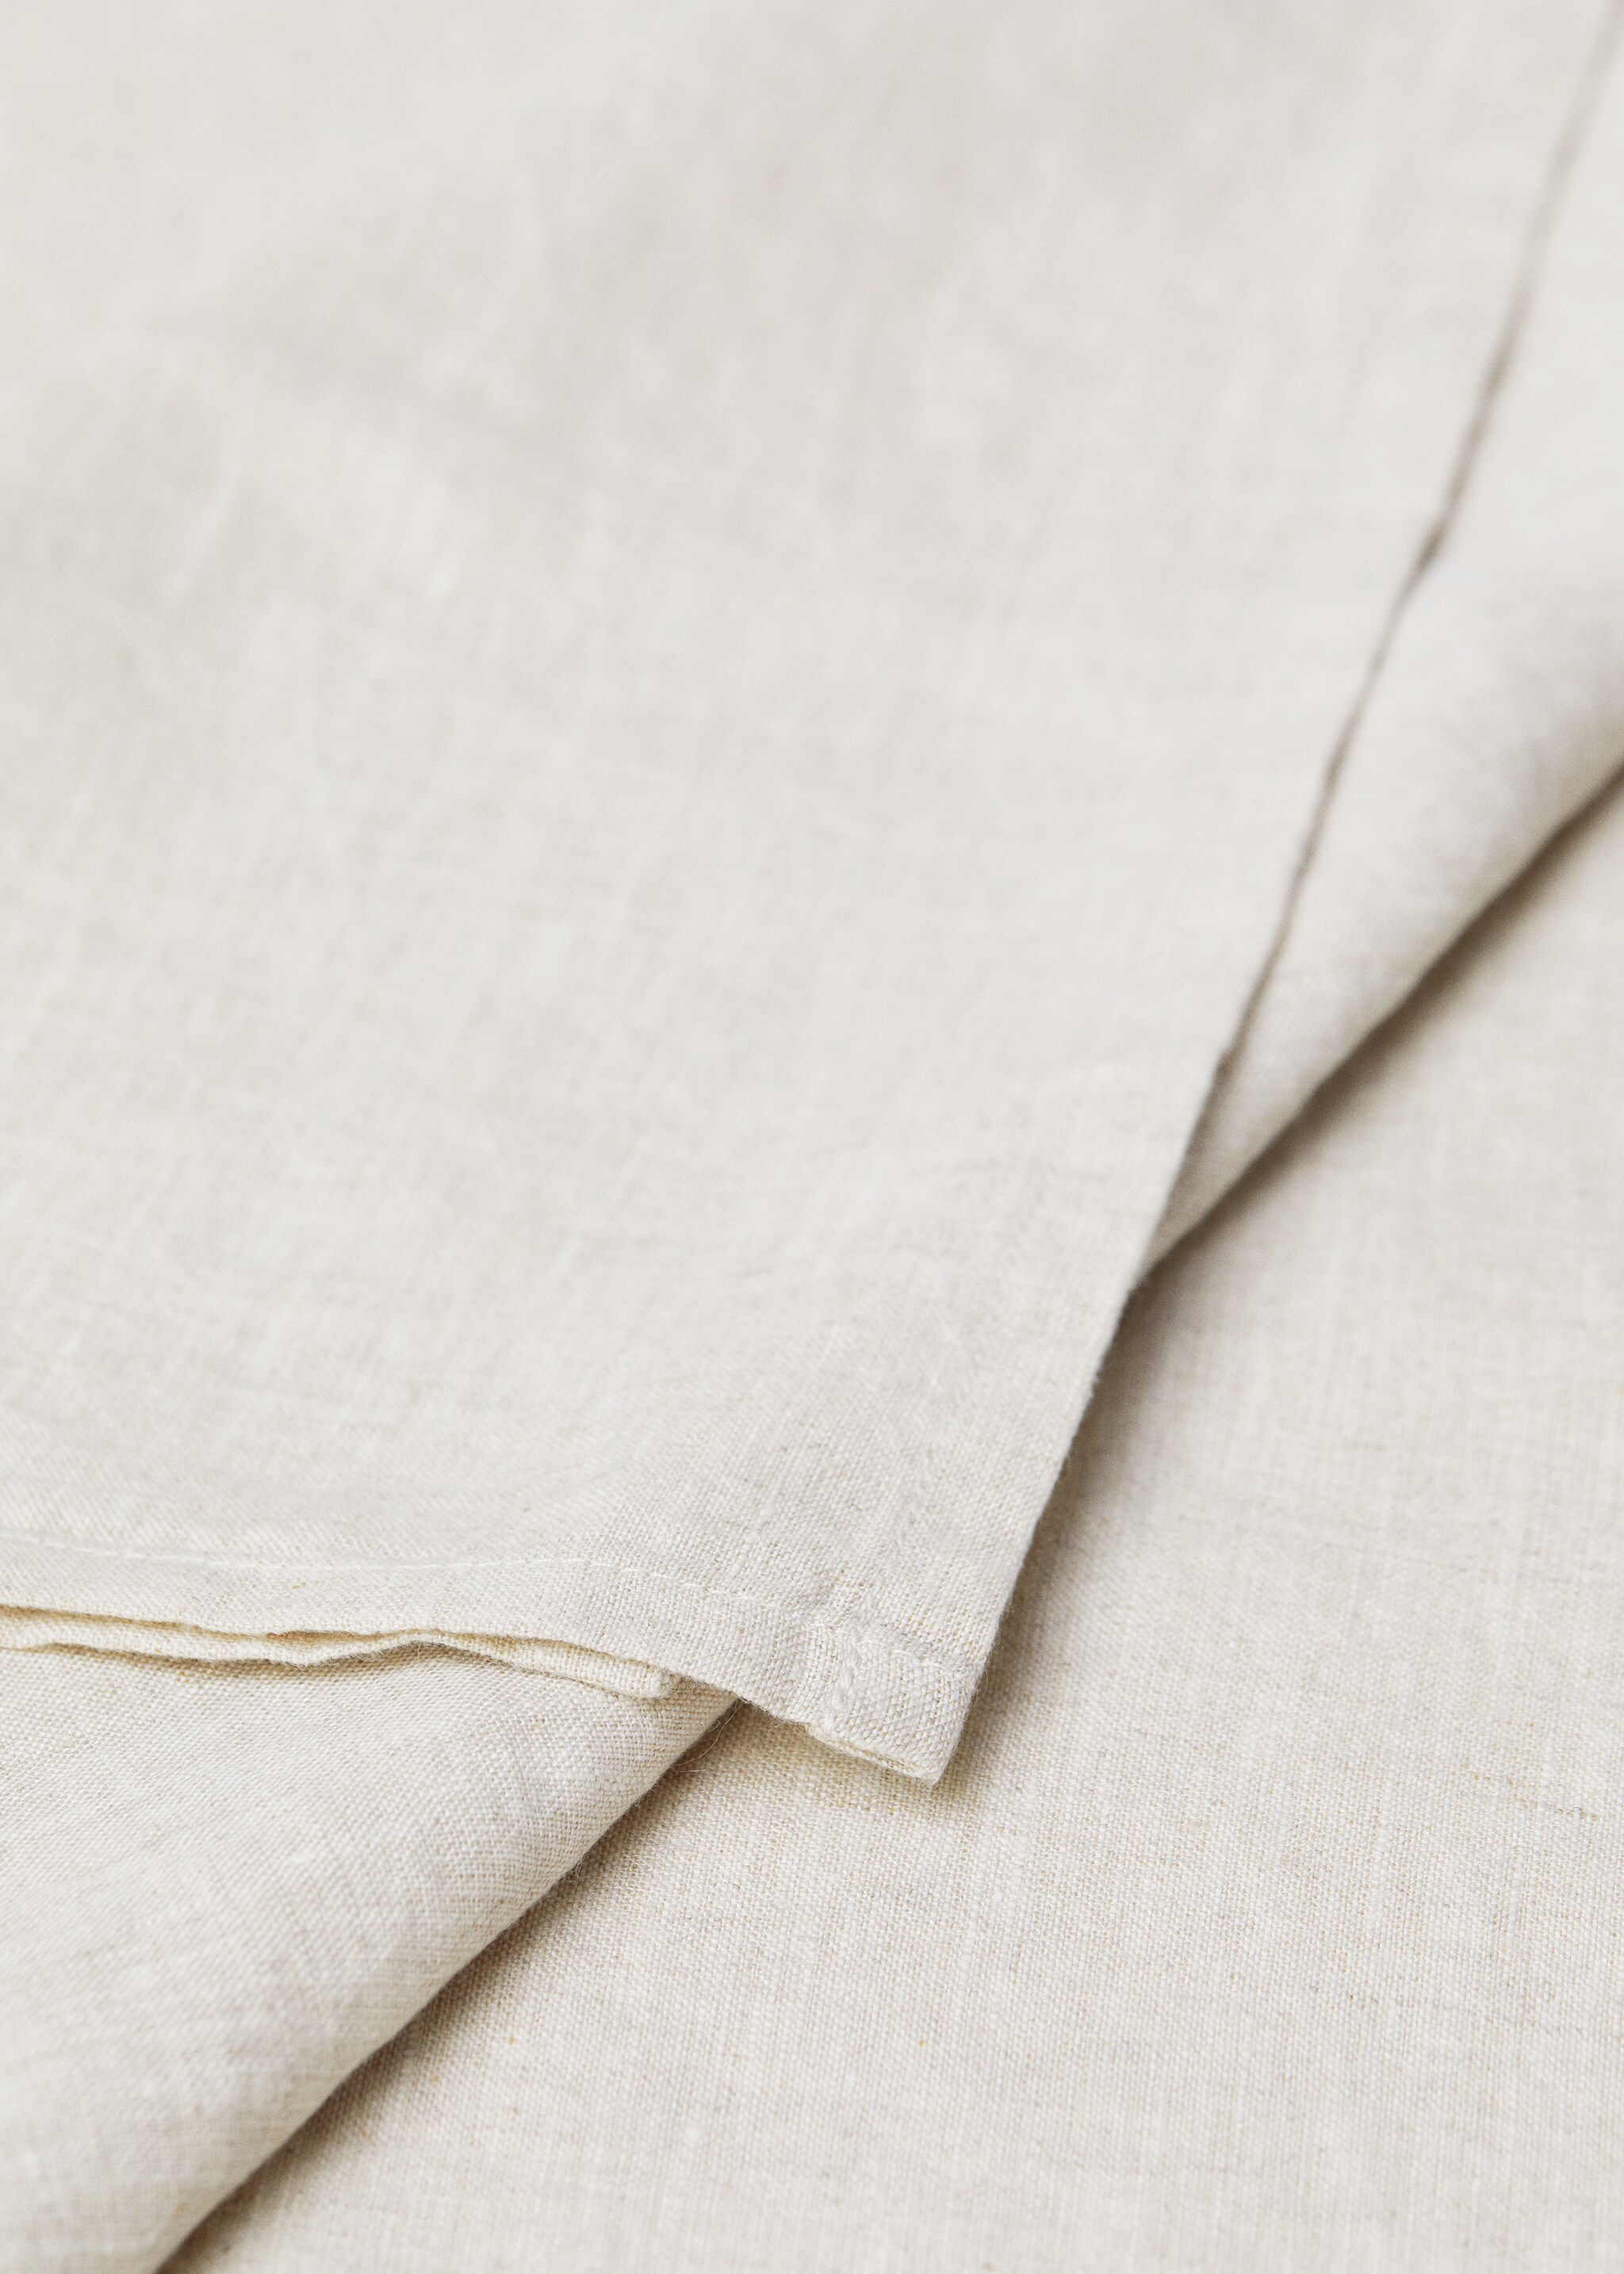 100% linen tablecloth 170x250cm - Details of the article 1